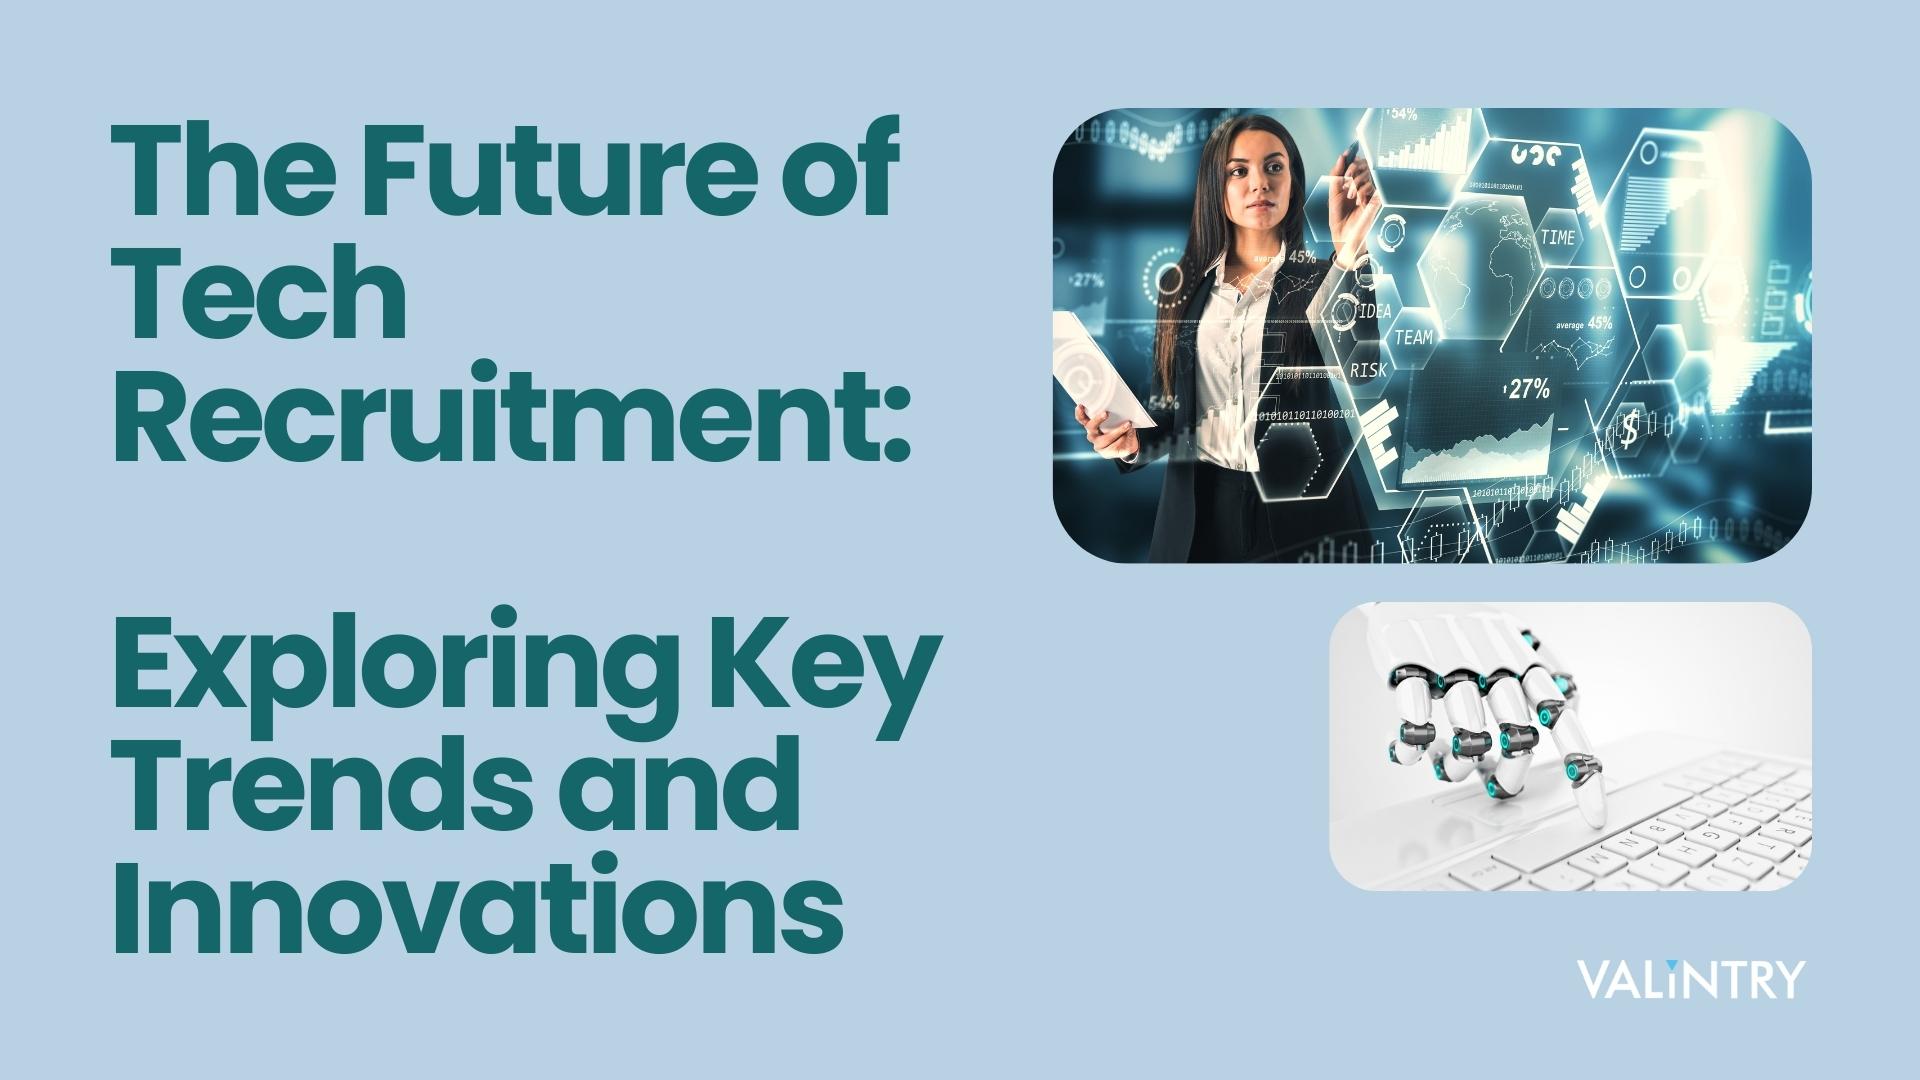 The Future of Tech Recruitment Firms: Trends and Innovations